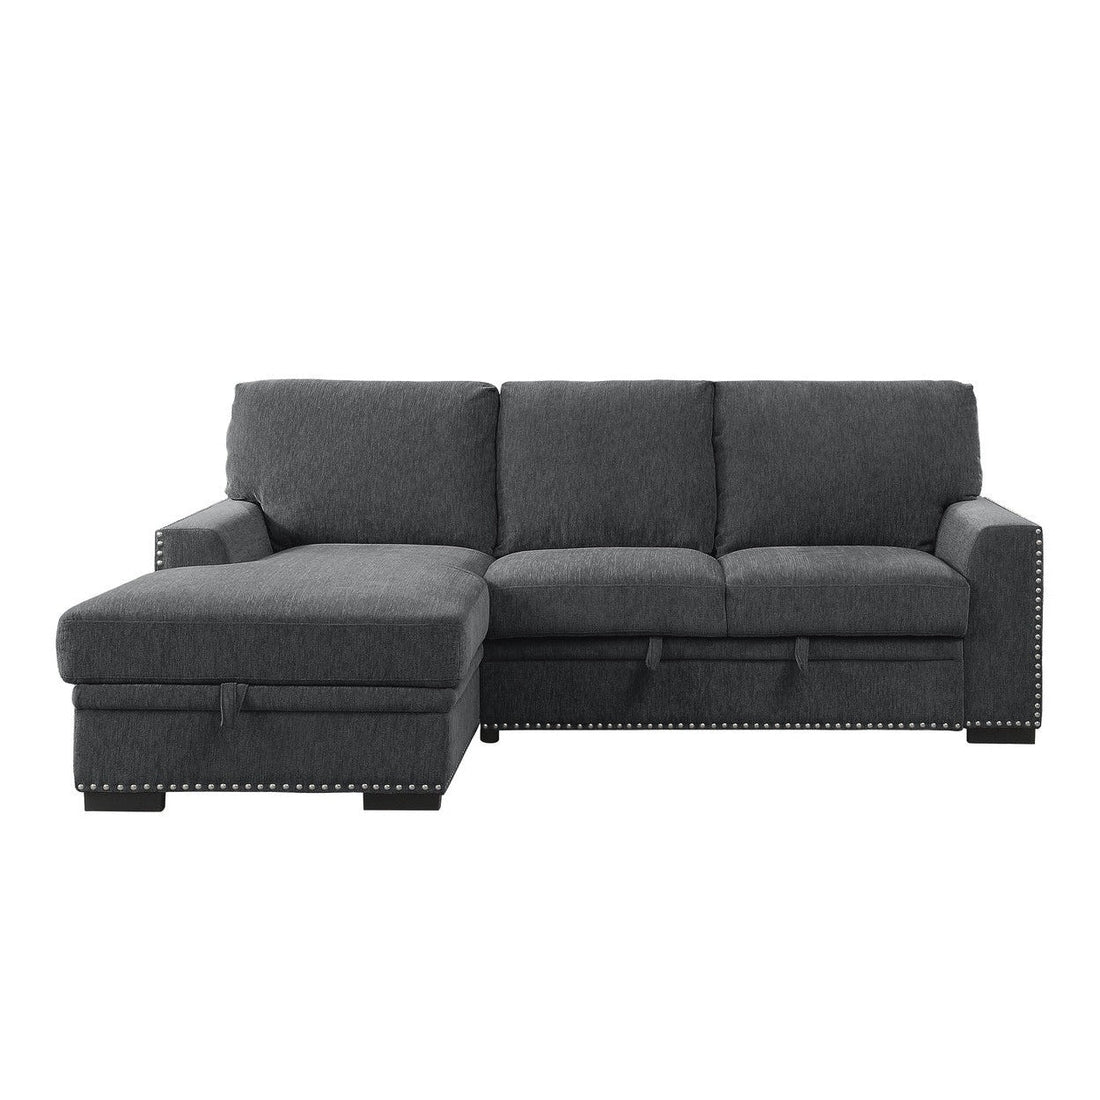 (2)2-Piece Sectional with Pull-out Bed and Left Chaise with Hidden Storage 9468CC*2LC2R